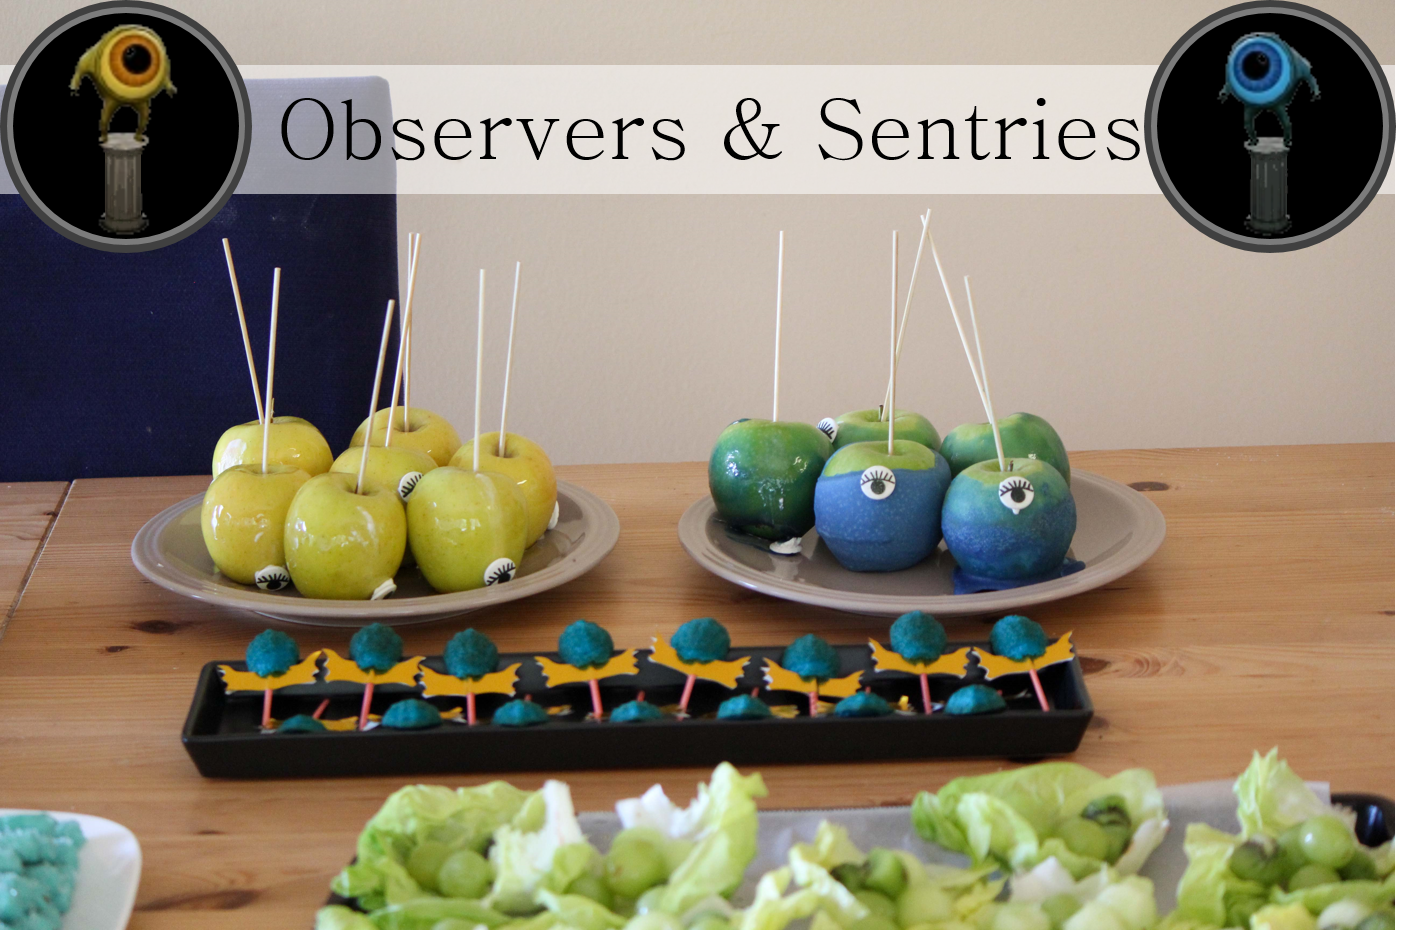 Yellow and blue candy apples make cute observer and sentry wards.